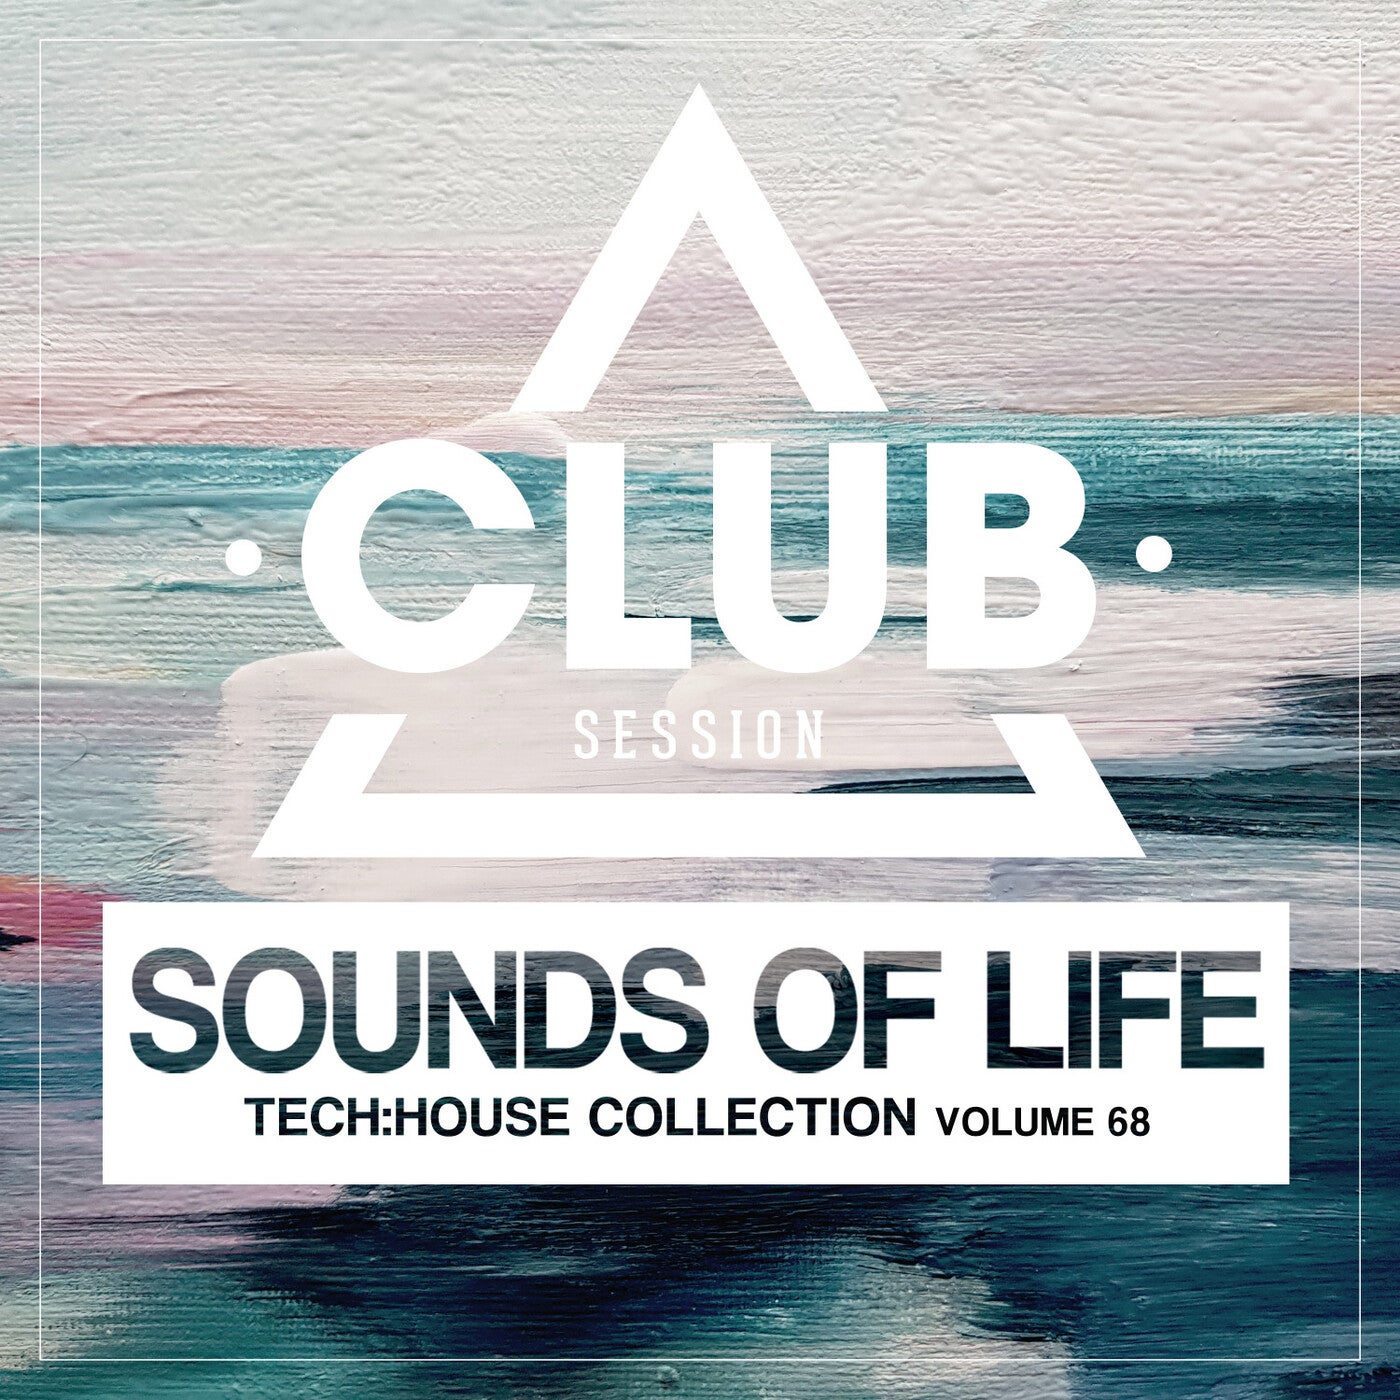 Sounds Of Life: Tech House Collection Vol. 68